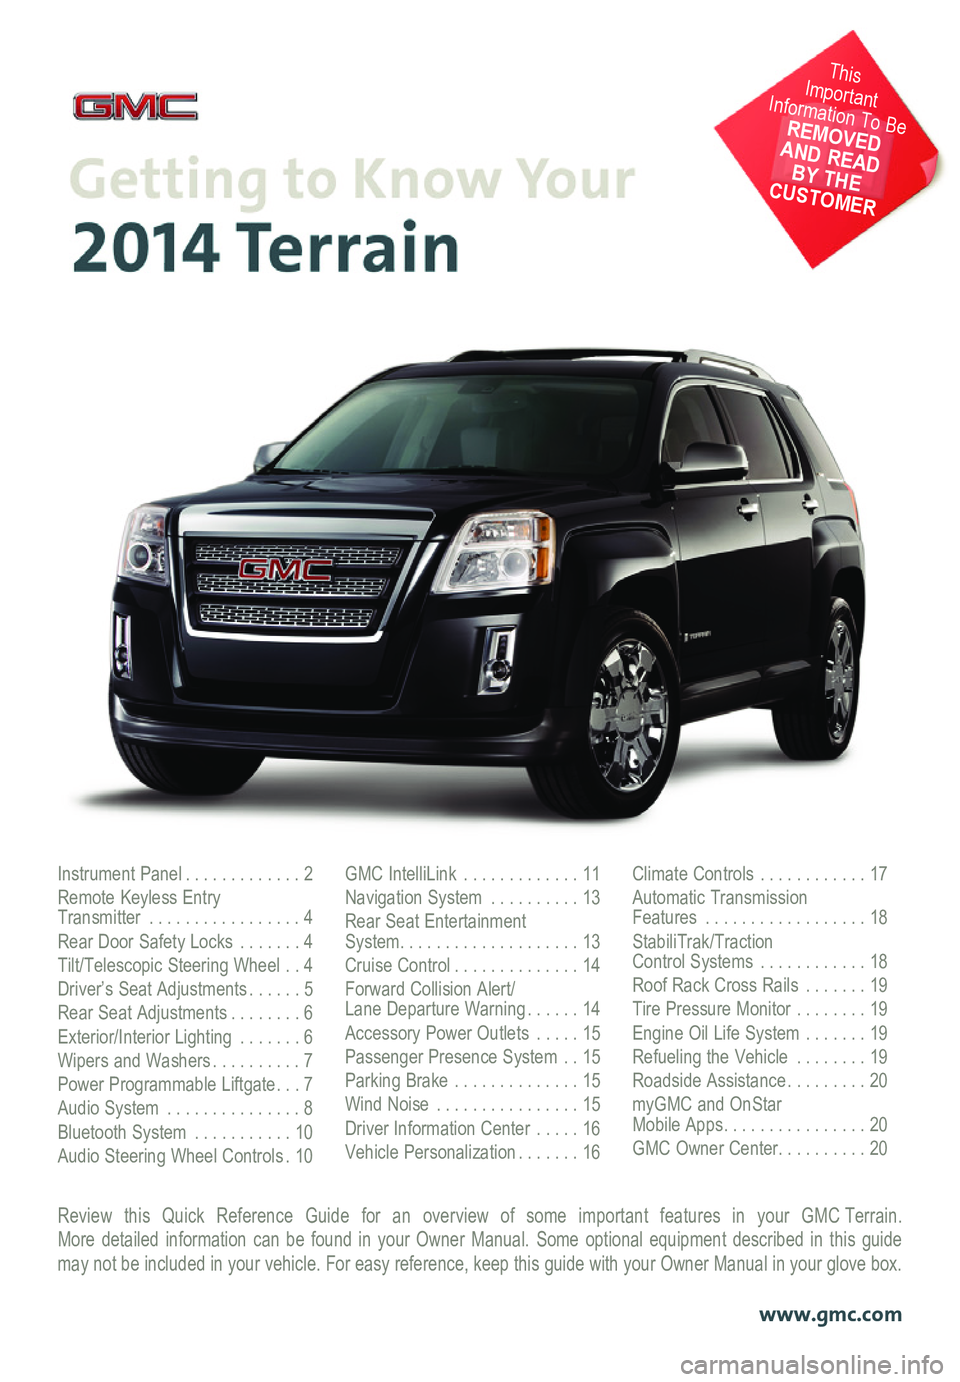 GMC TERRAIN 2014  Get To Know Guide Review this Quick Reference Guide for an overview of some important features in your GMC Terrain.  More detailed information can be found in your Owner Manual. Some option\
al equipment described in t